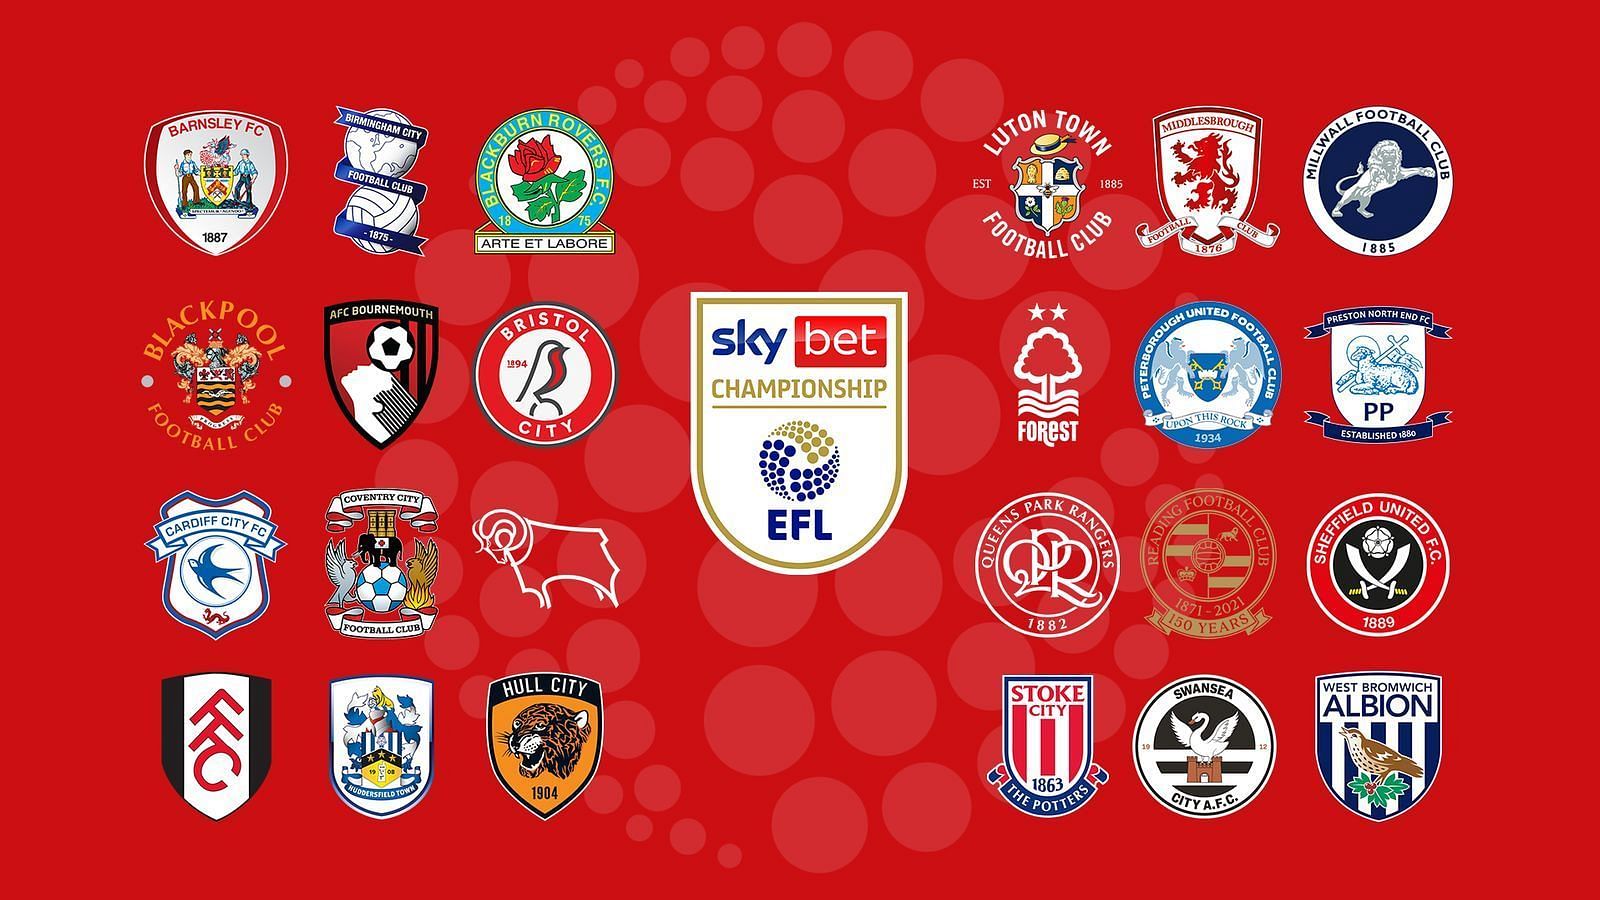 The EFL Championship is heading for a thrilling finish